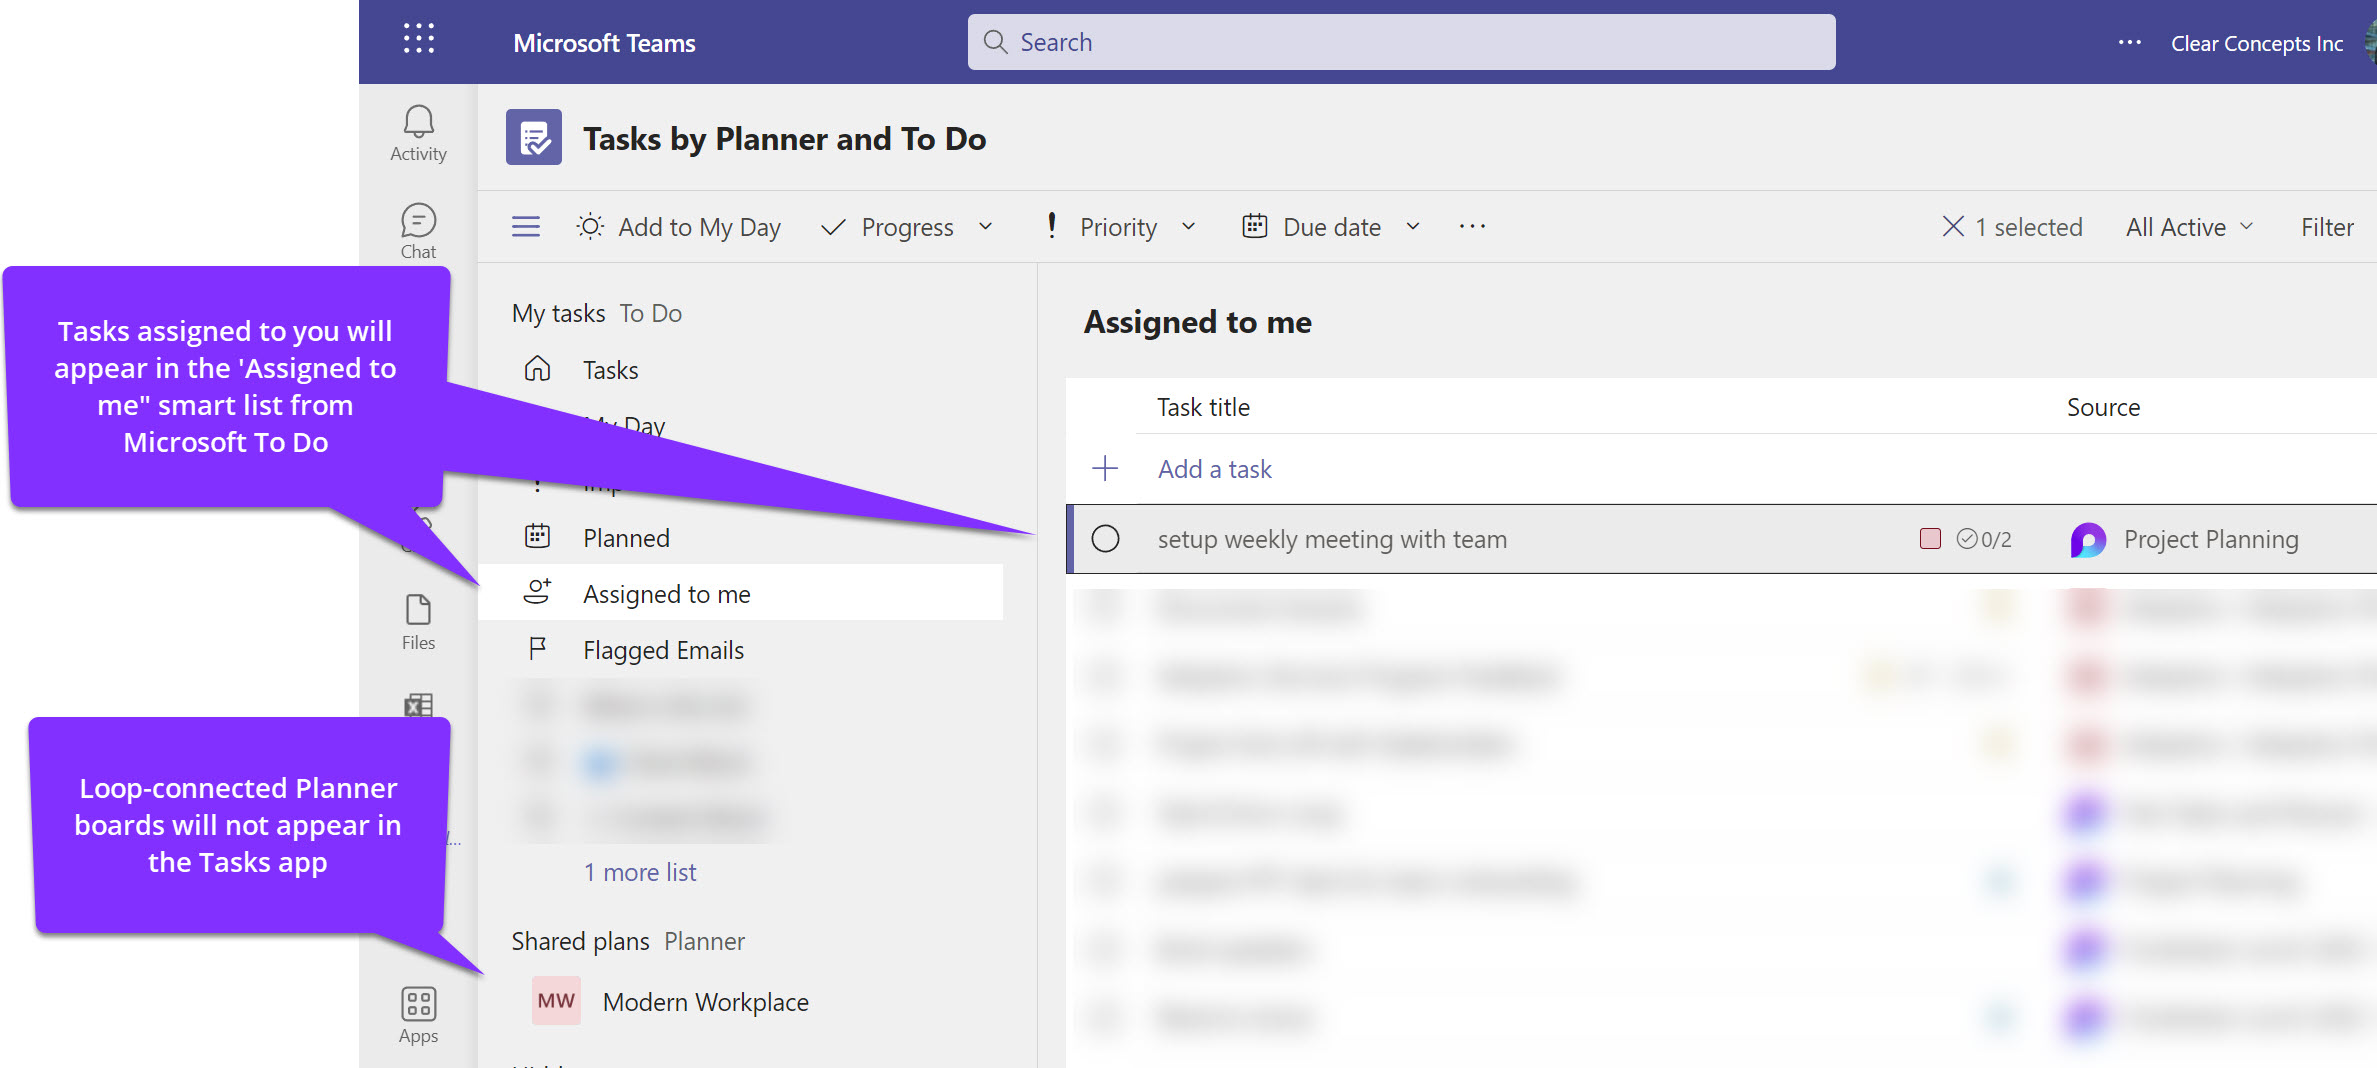 In the 'Tasks by Planner and To Do" app, you can see tasks assigned to you from the "assigned to you" smart list, but you cannot see Loop-connected Planner boards